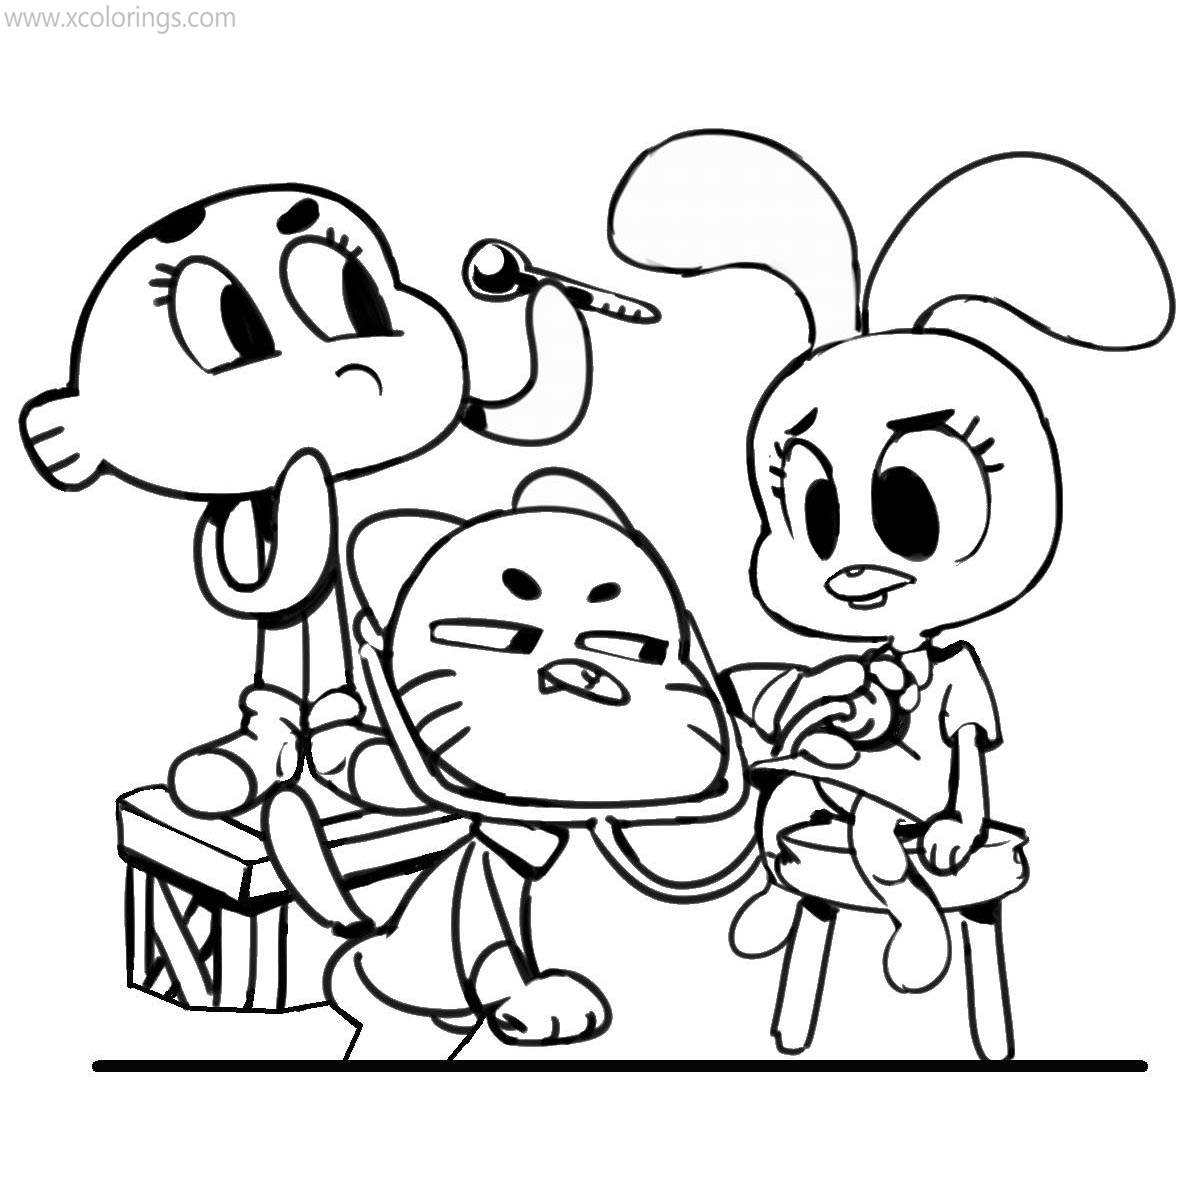 Free The Amazing World of Gumball Coloring Pages Gumball Darwin and Anais printable